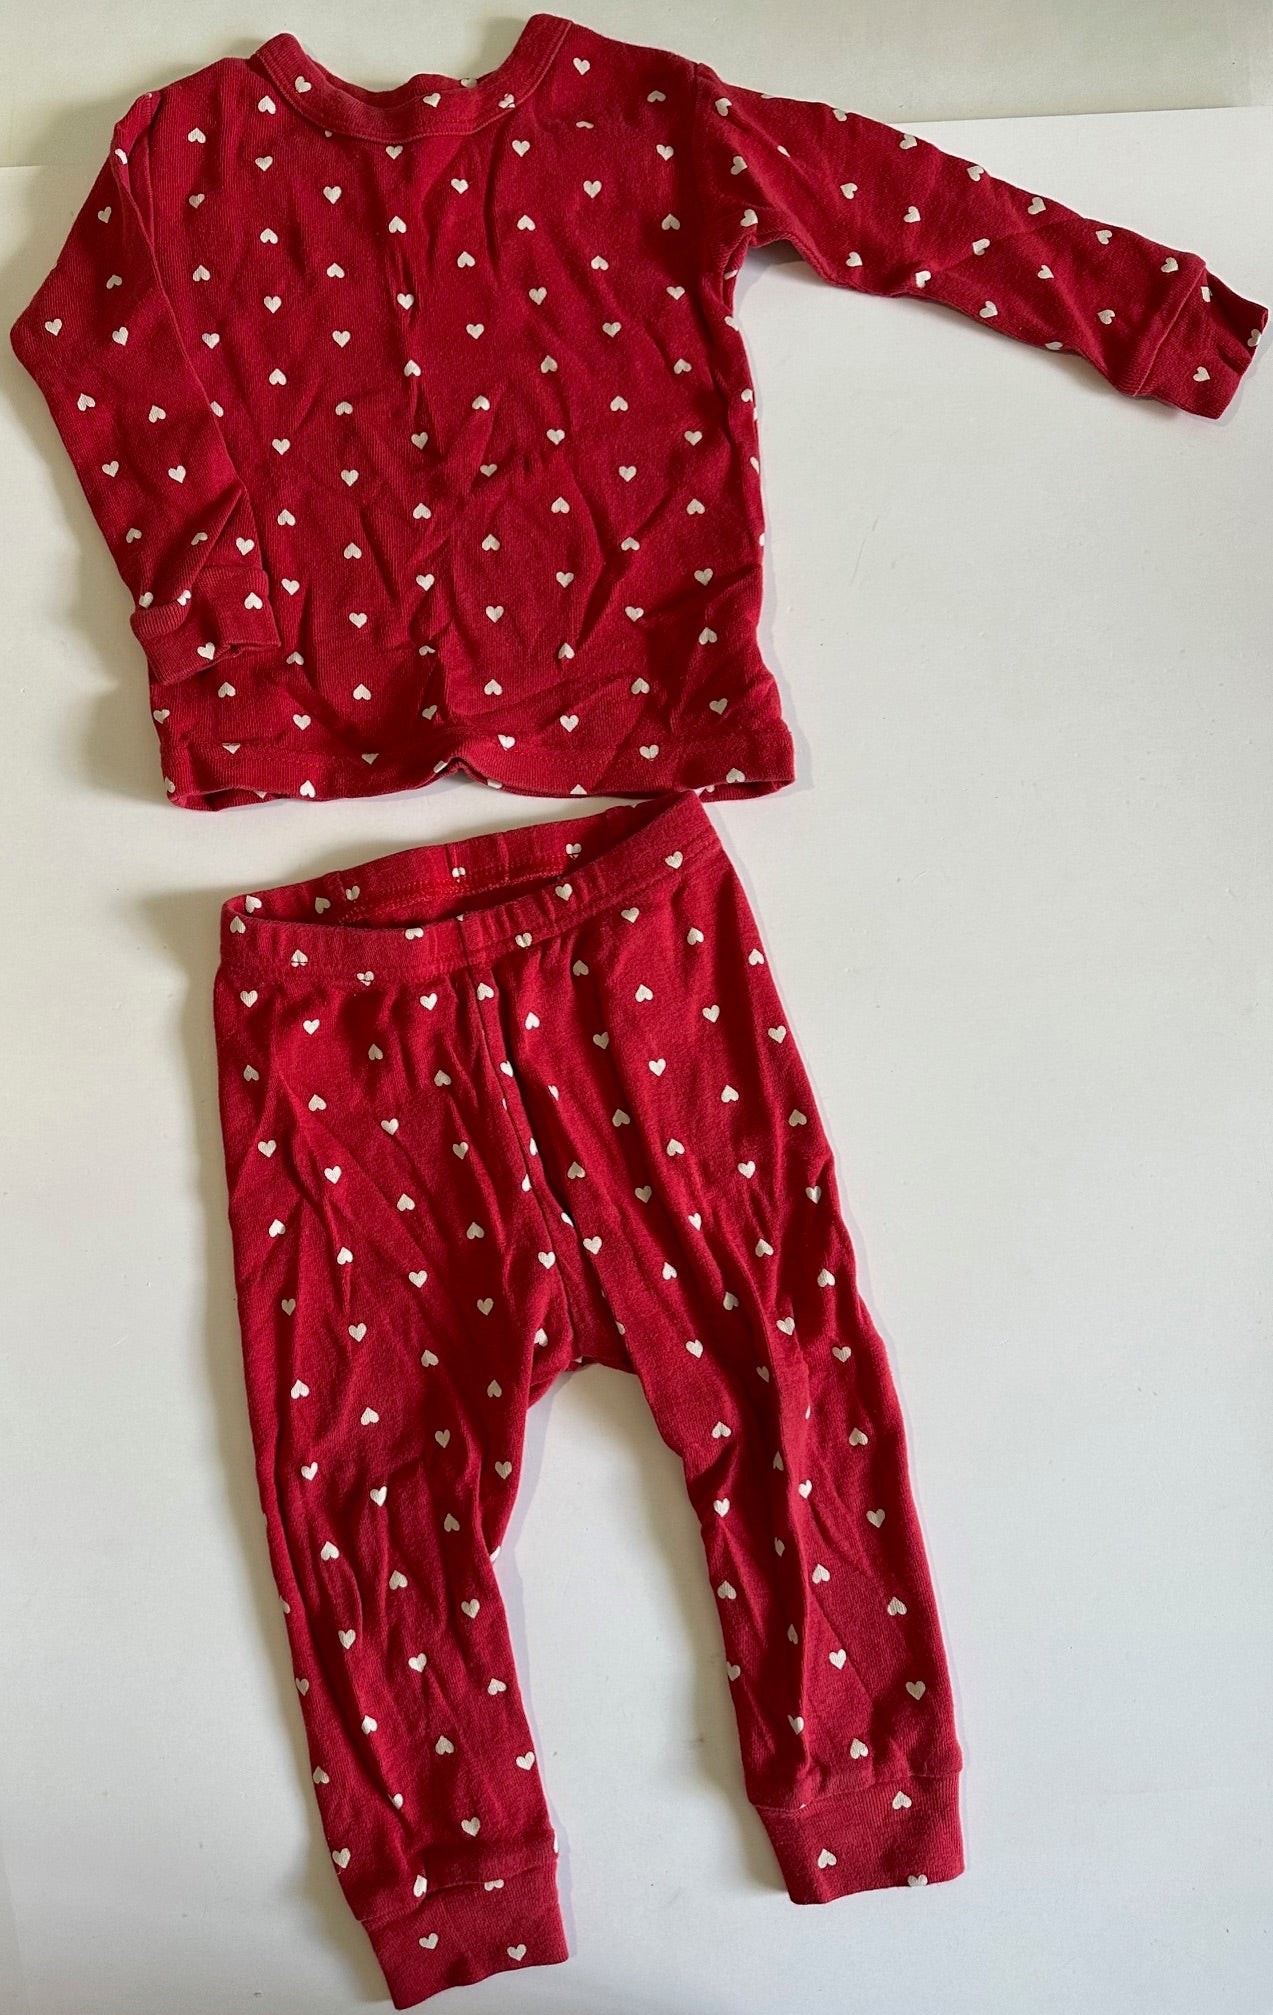 Baby Gap, Two-Piece Red and White Hearts Pyjamas - 12-18 Months